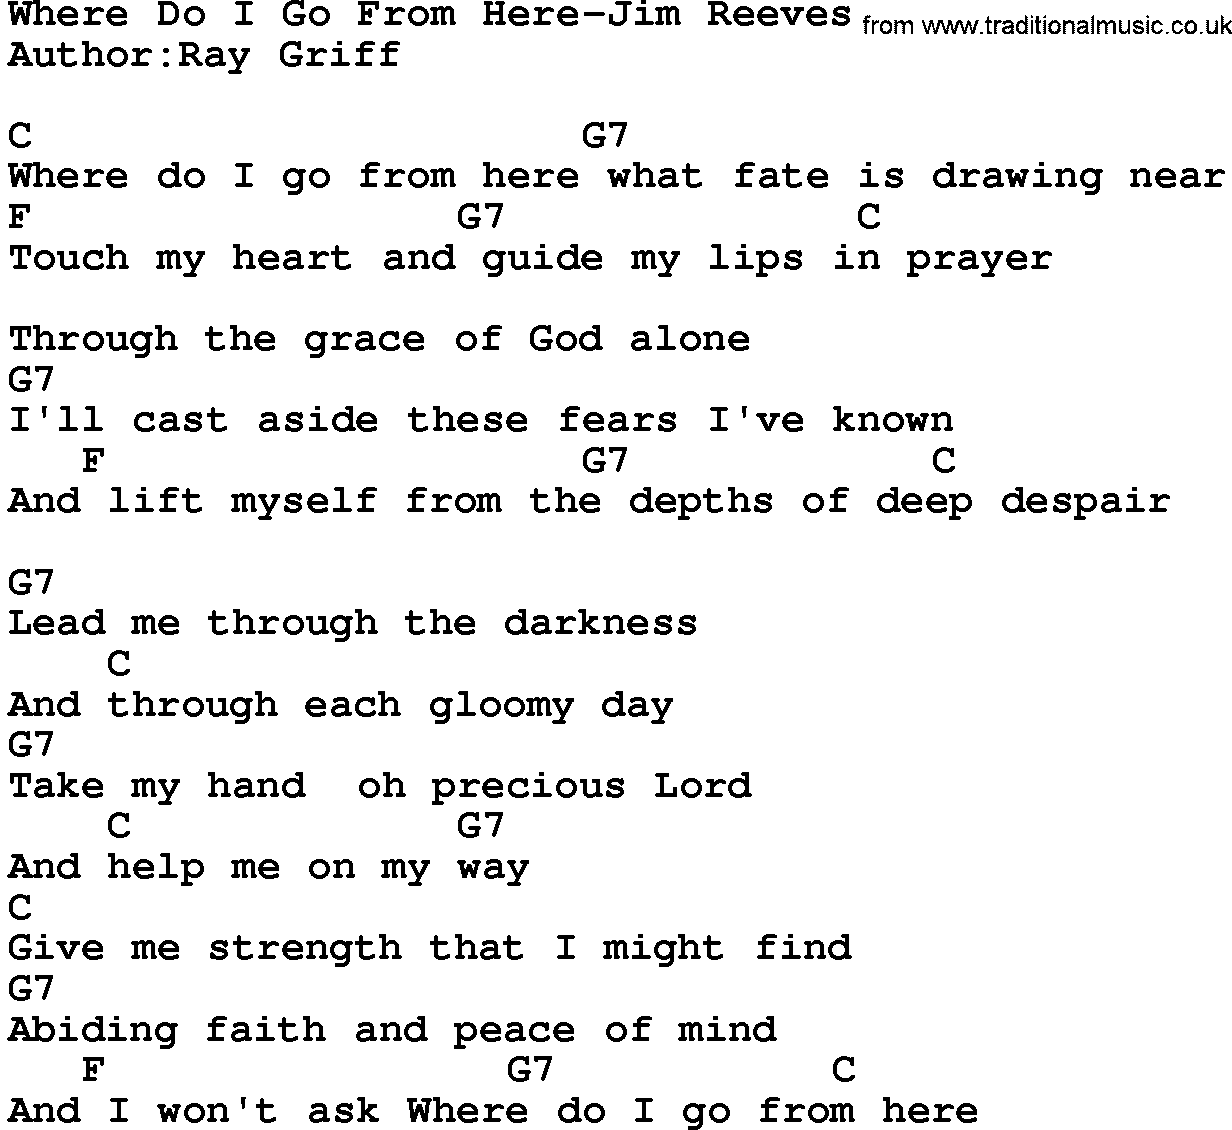 Country music song: Where Do I Go From Here-Jim Reeves lyrics and chords